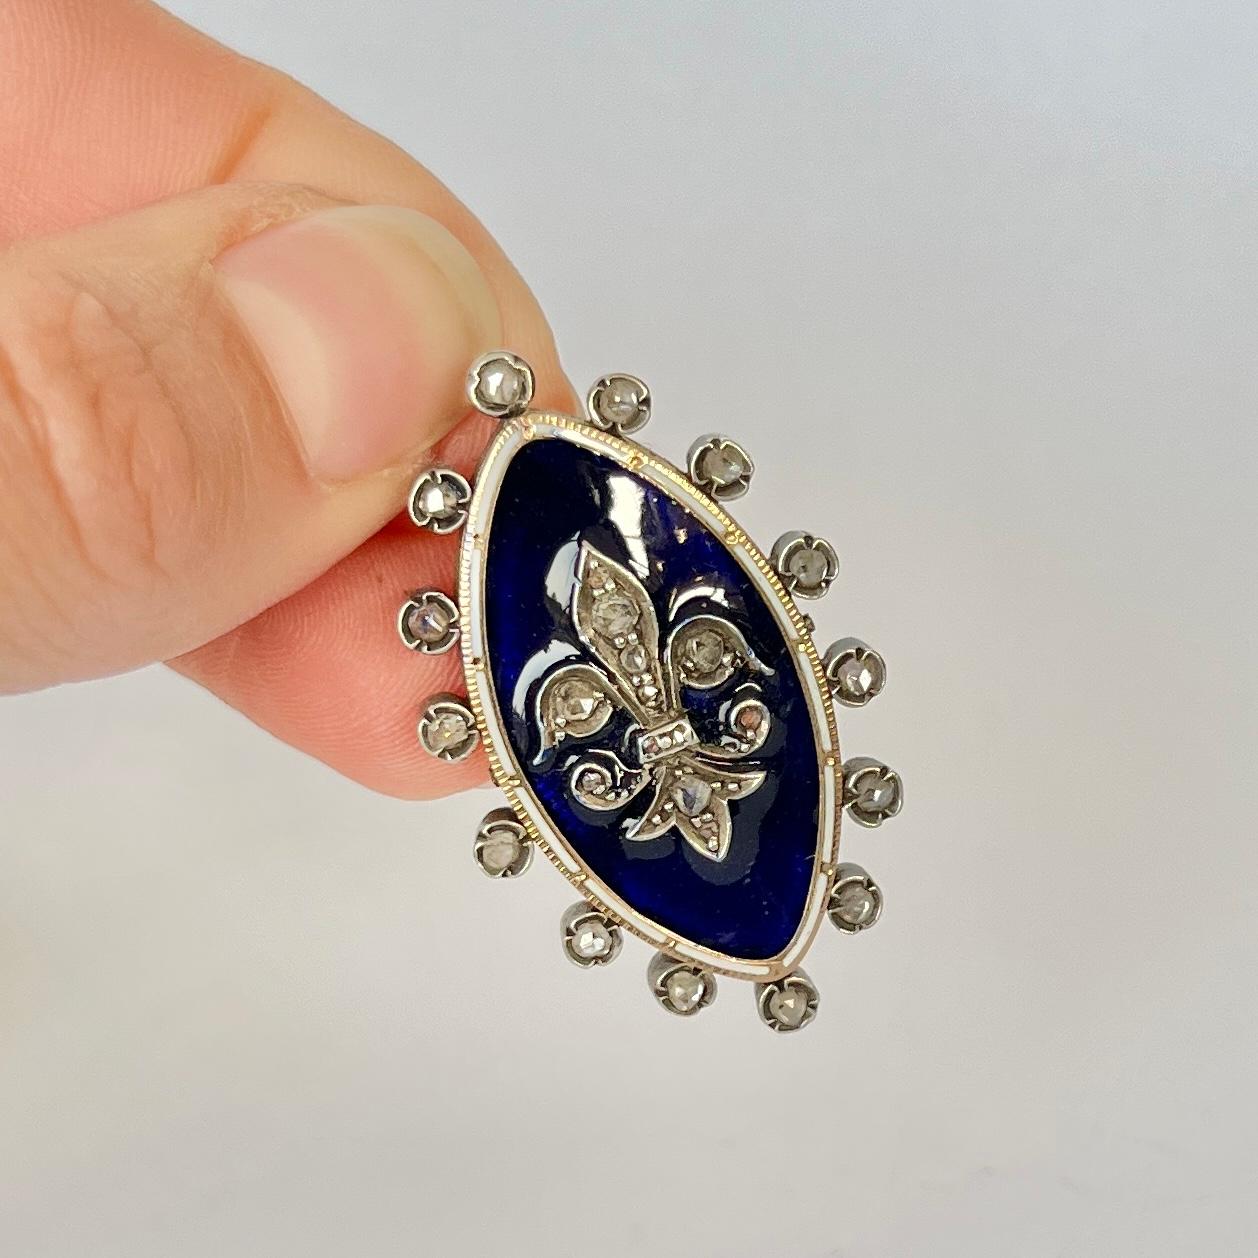 This lovely pendant has gorgeous blue enamel and is set with rose cut diamonds all the way around and at the centre. Modelled in 9ct gold. 

Dimensions: 37x23mm

Weight: 10.3g